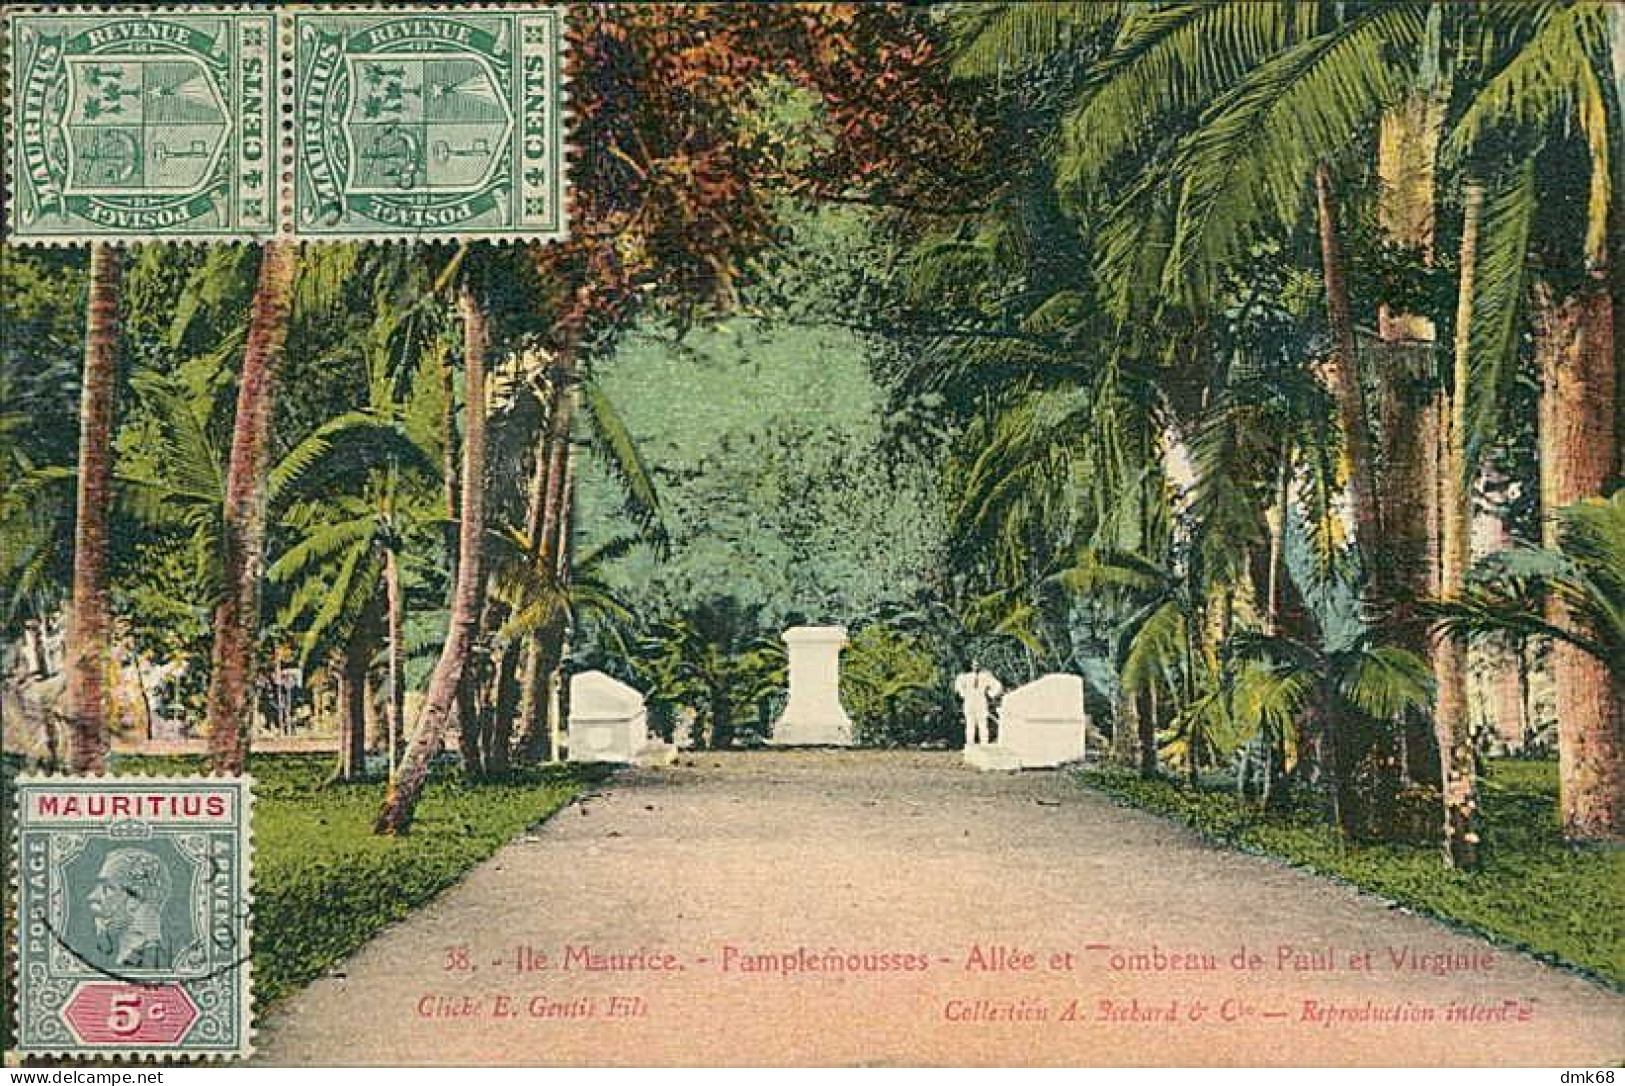 AFRICA - MAURITIUS / ILE MAURICE - PAMPLEMOUSSES - ALLEE ET TOMBEAUX DE PAUL ET VIRGINIE - MAILED 1924 / STAMPS (12576) - Maurice